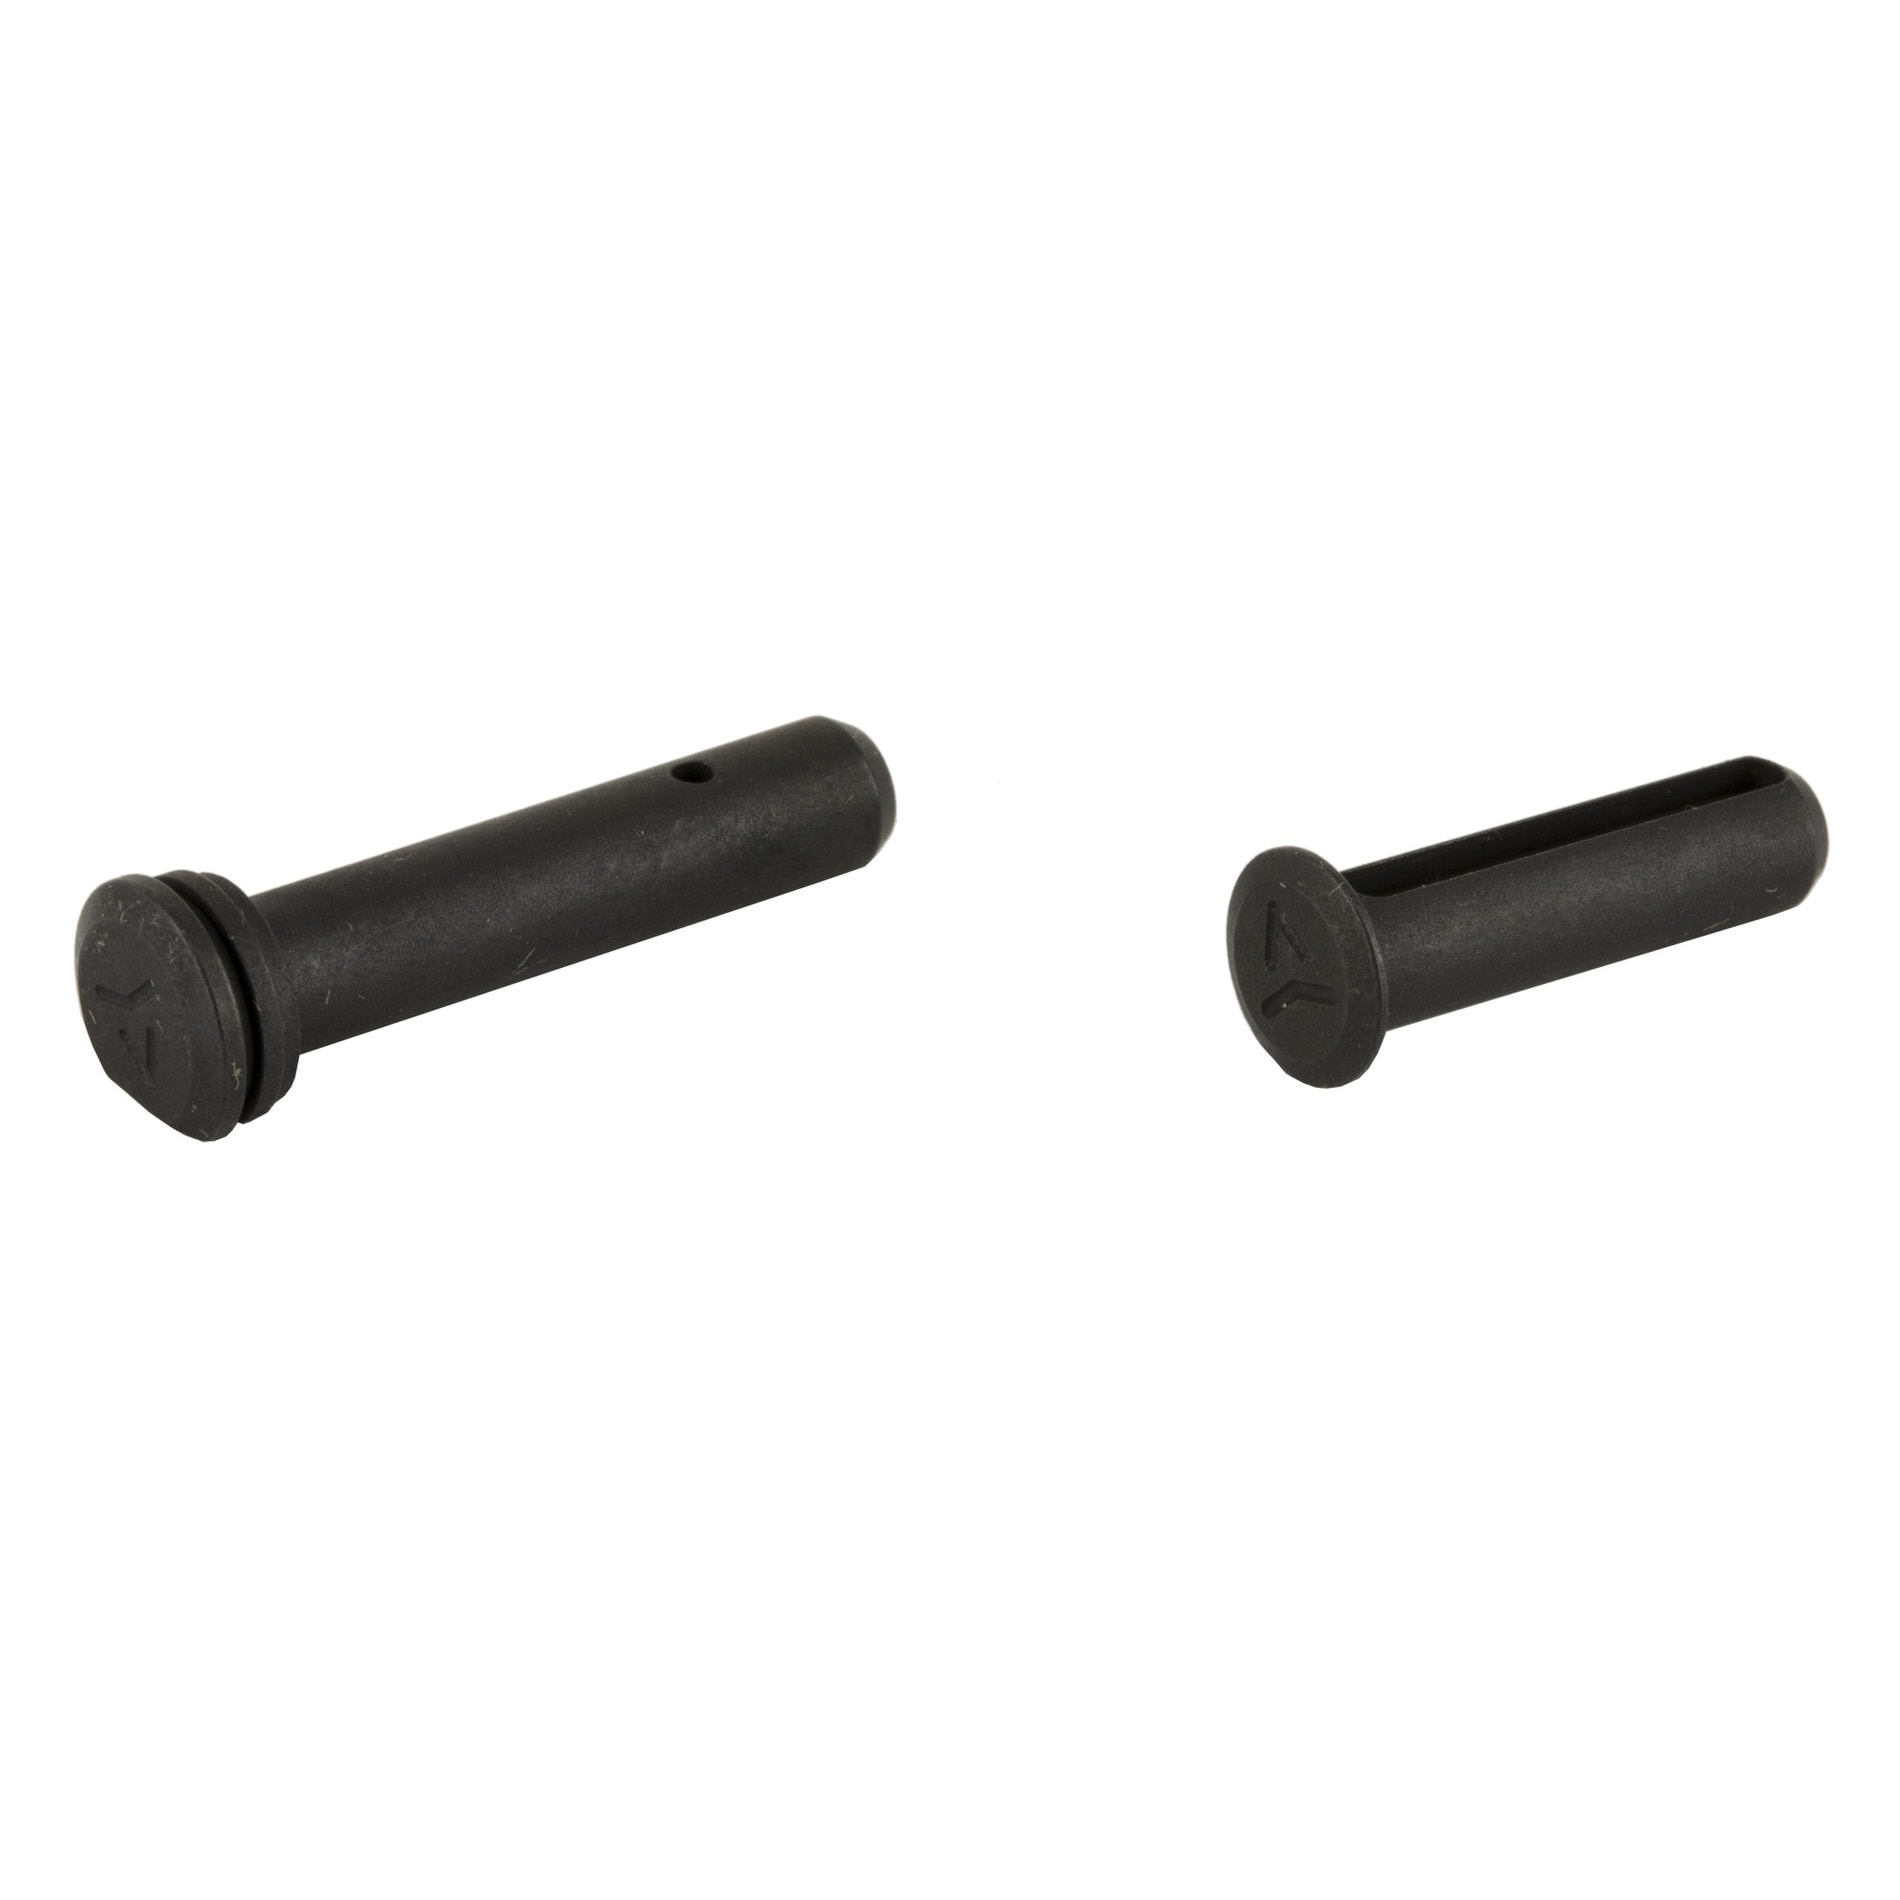 Radian Weapons Enhanced Takedown Pins for AR-15